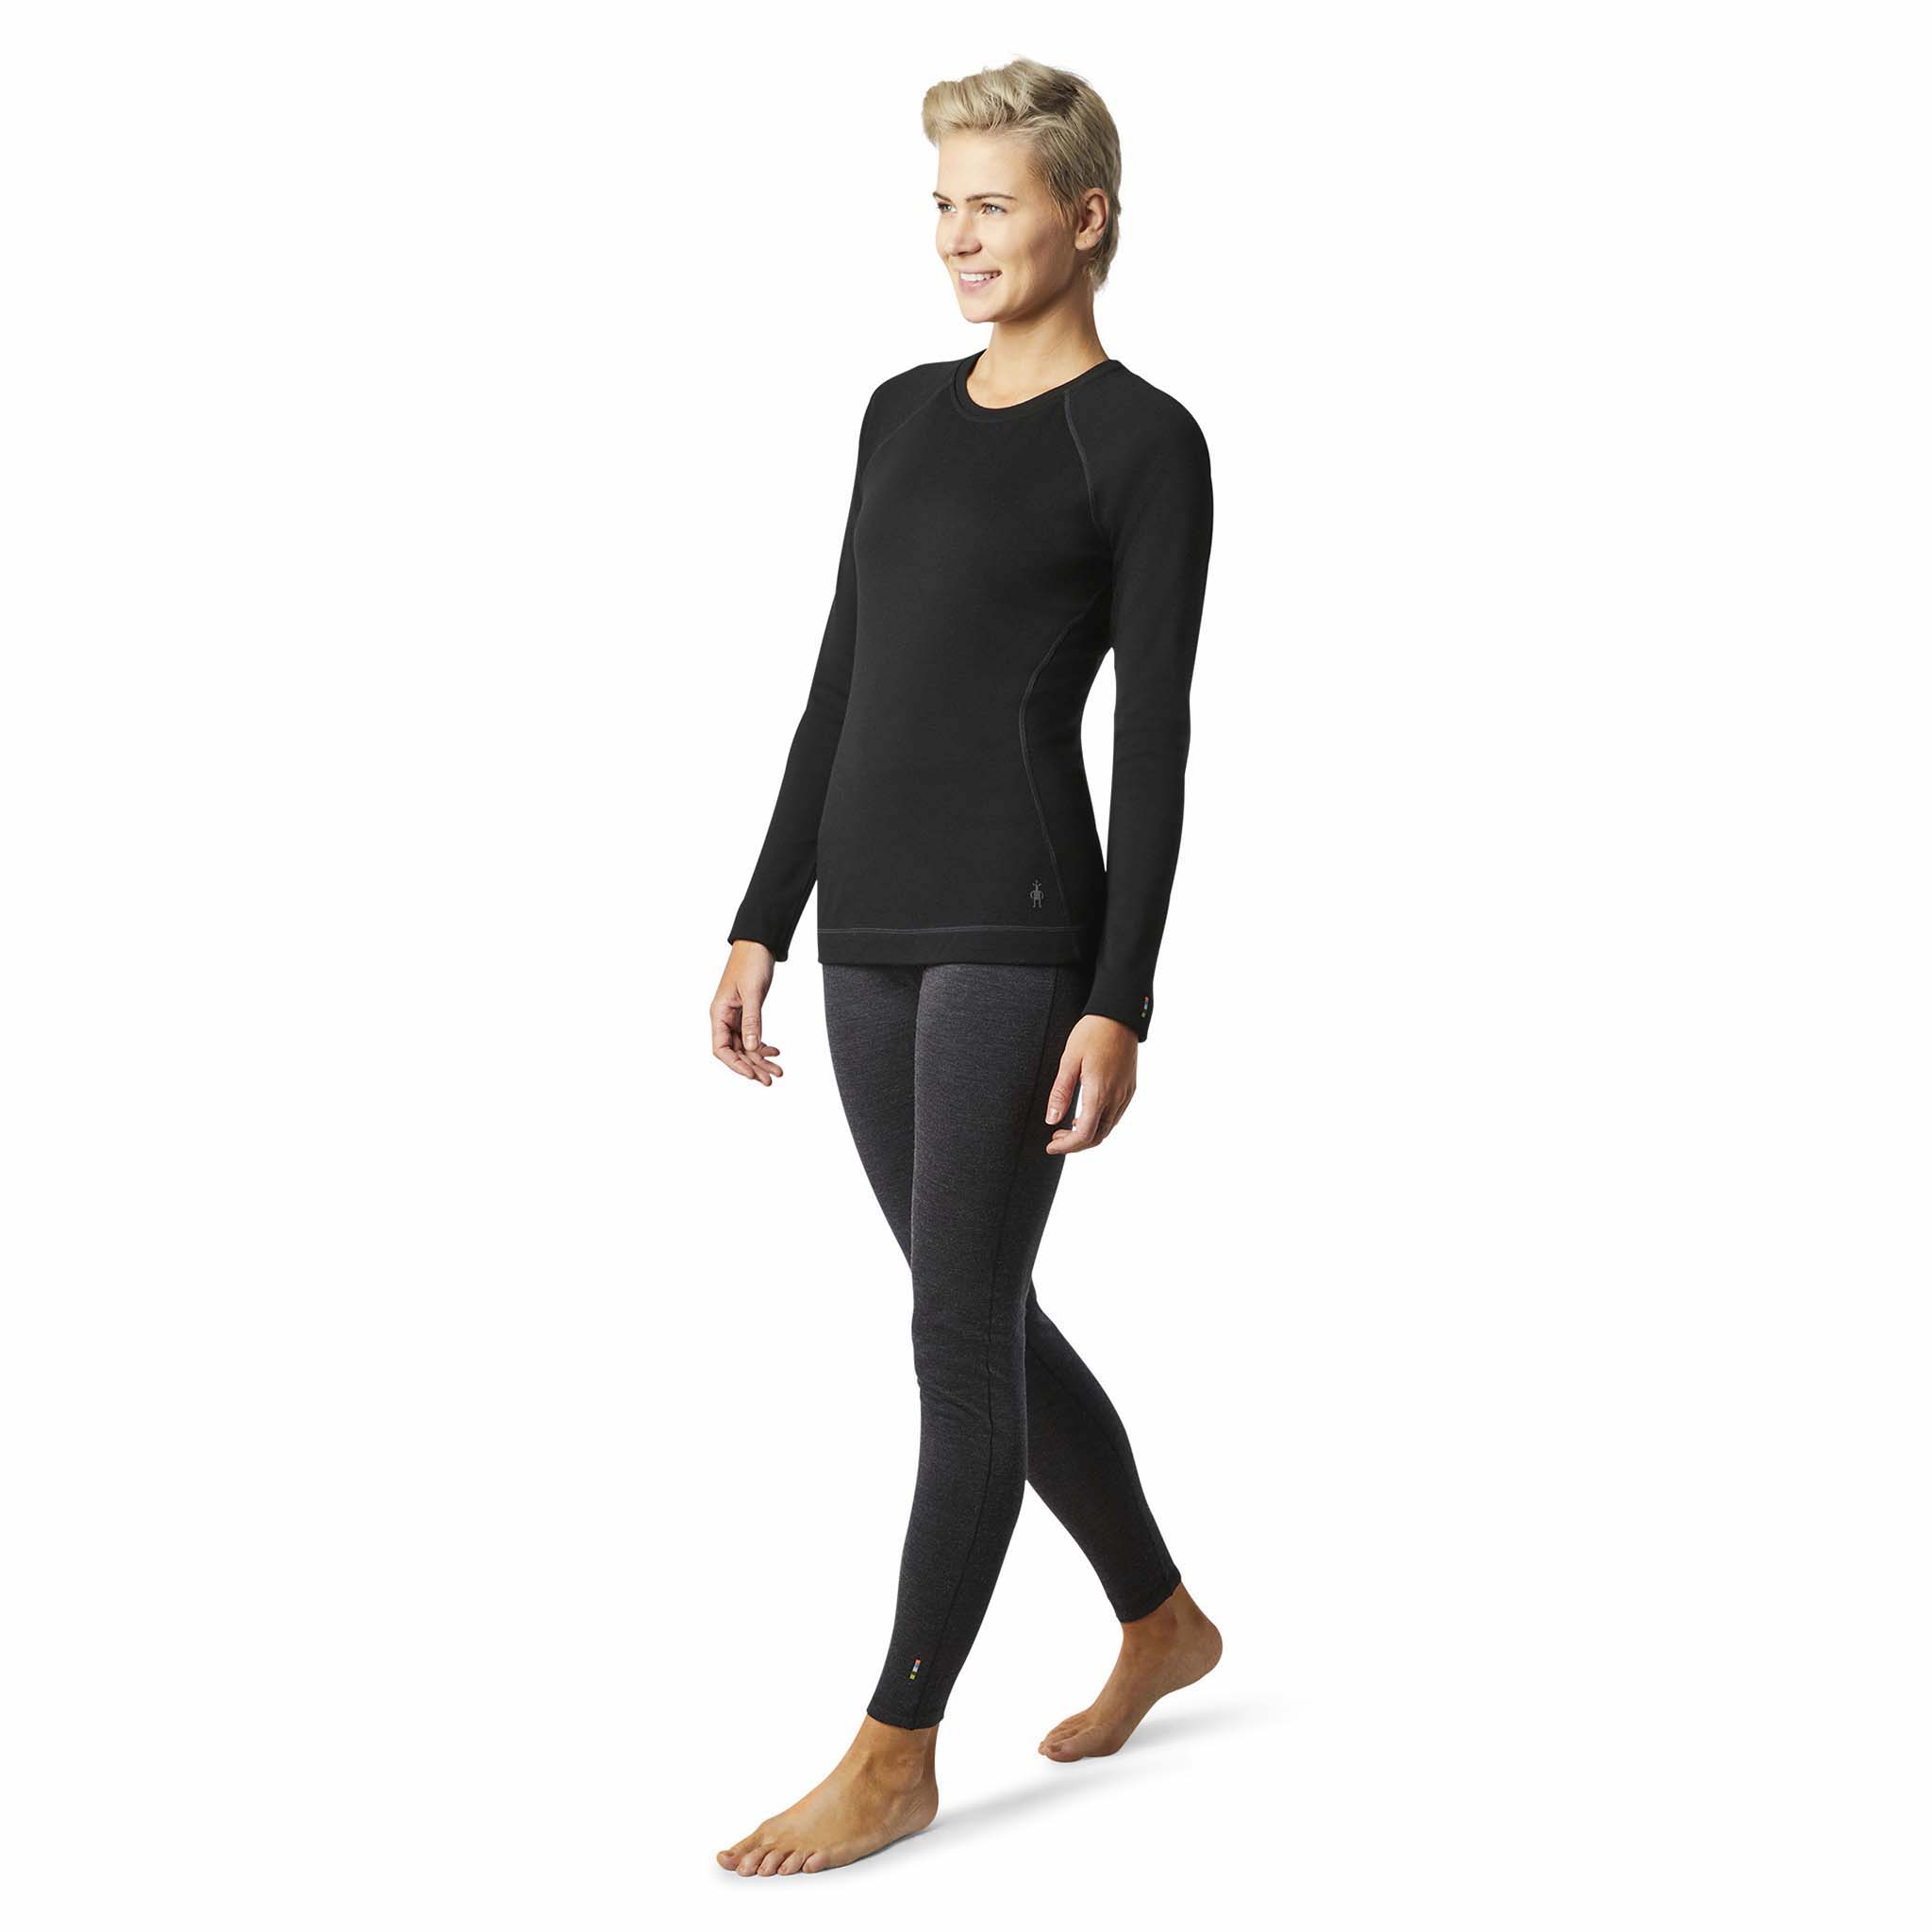 Female Autumn Thermal Underwear Round Neck Baselayer Tight Women's Thermal  Long-Sleeve Tight Warmer Tops Shirt Fitness Running Yoga Training Black M 